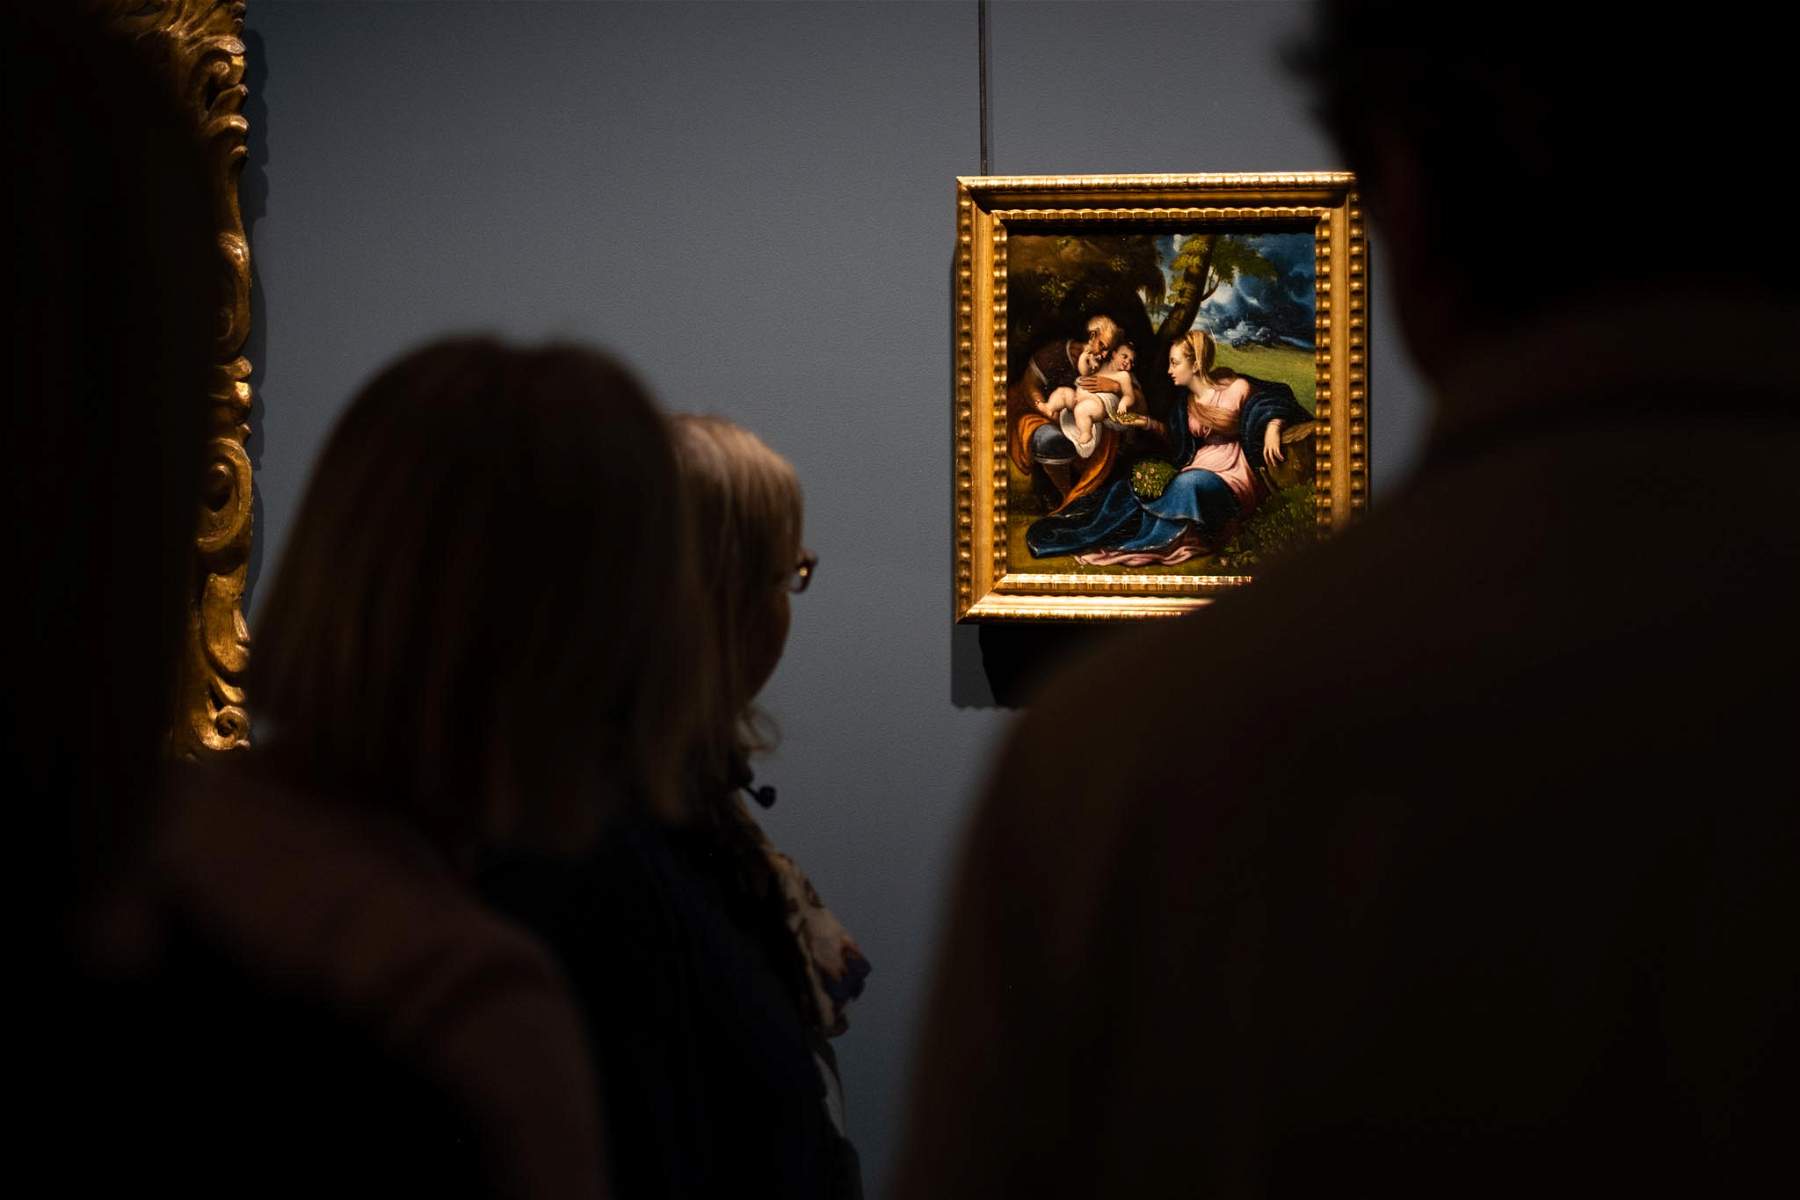 With season tickets, visitors return to the museum at least 6 times more. The study in Piedmont and Lombardy